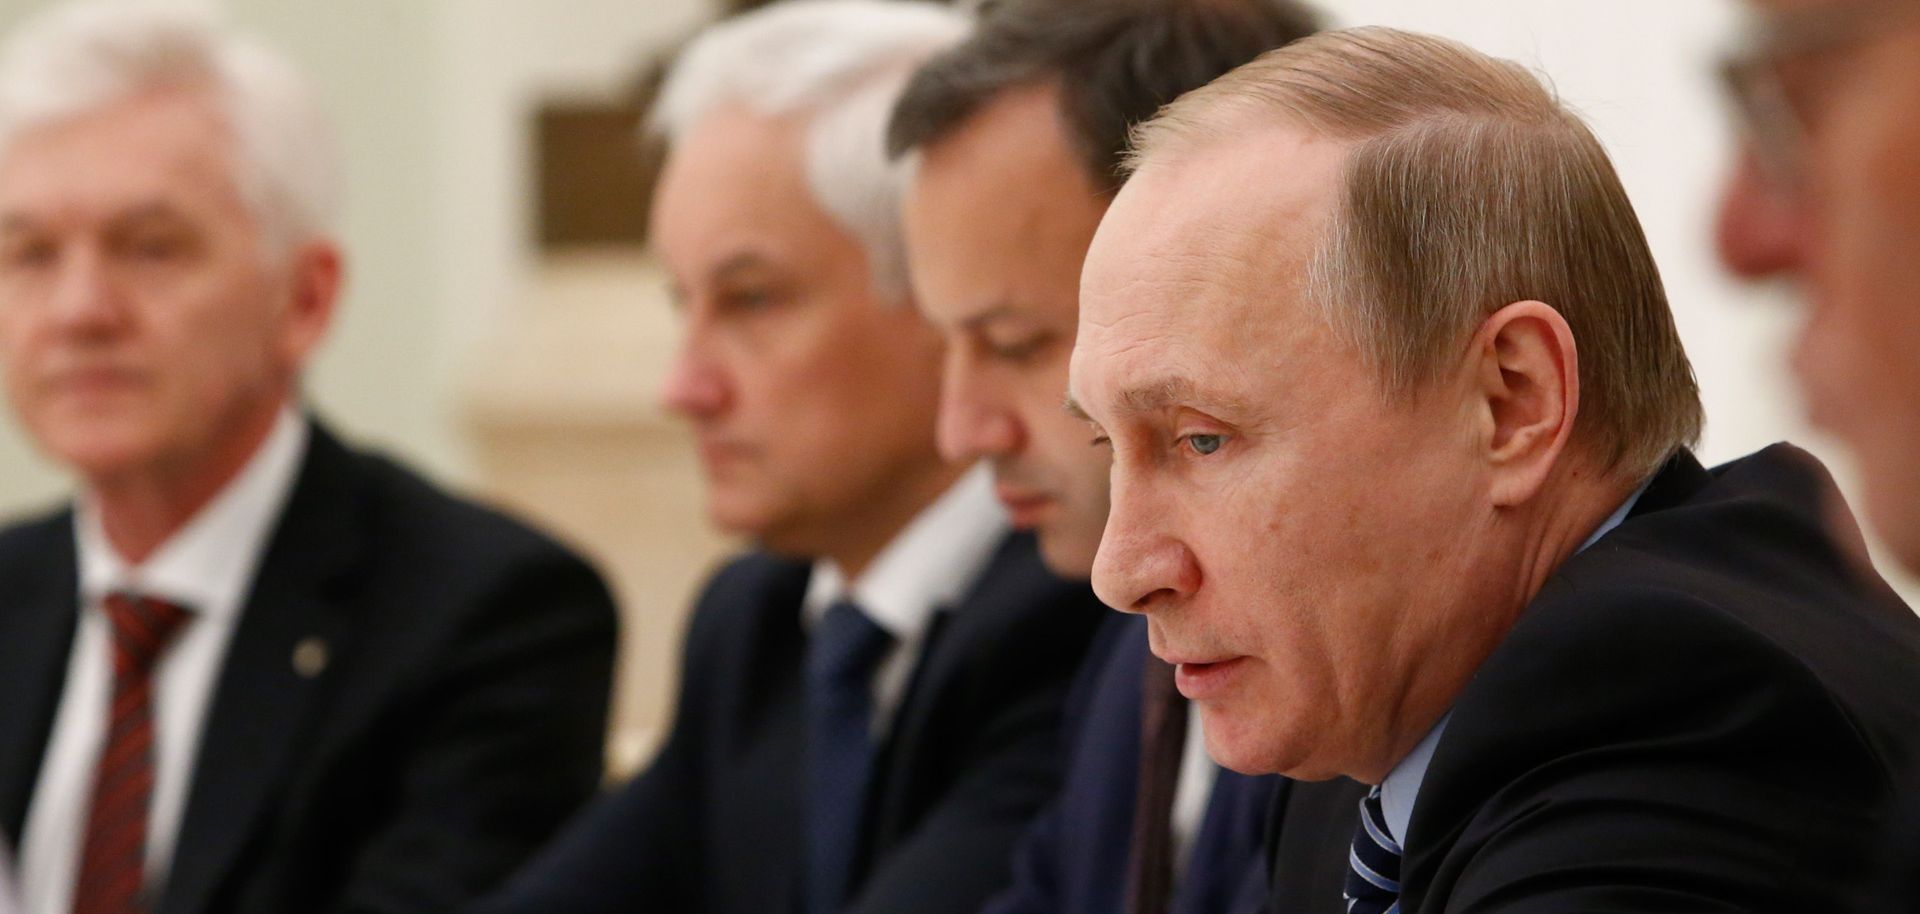 Russian President Vladimir Putin has remained relatively centrist. Now, Russia's political elite, as well as its voting public, want him to take a side. To remedy Russia's many problems, something will have to give -- but what?